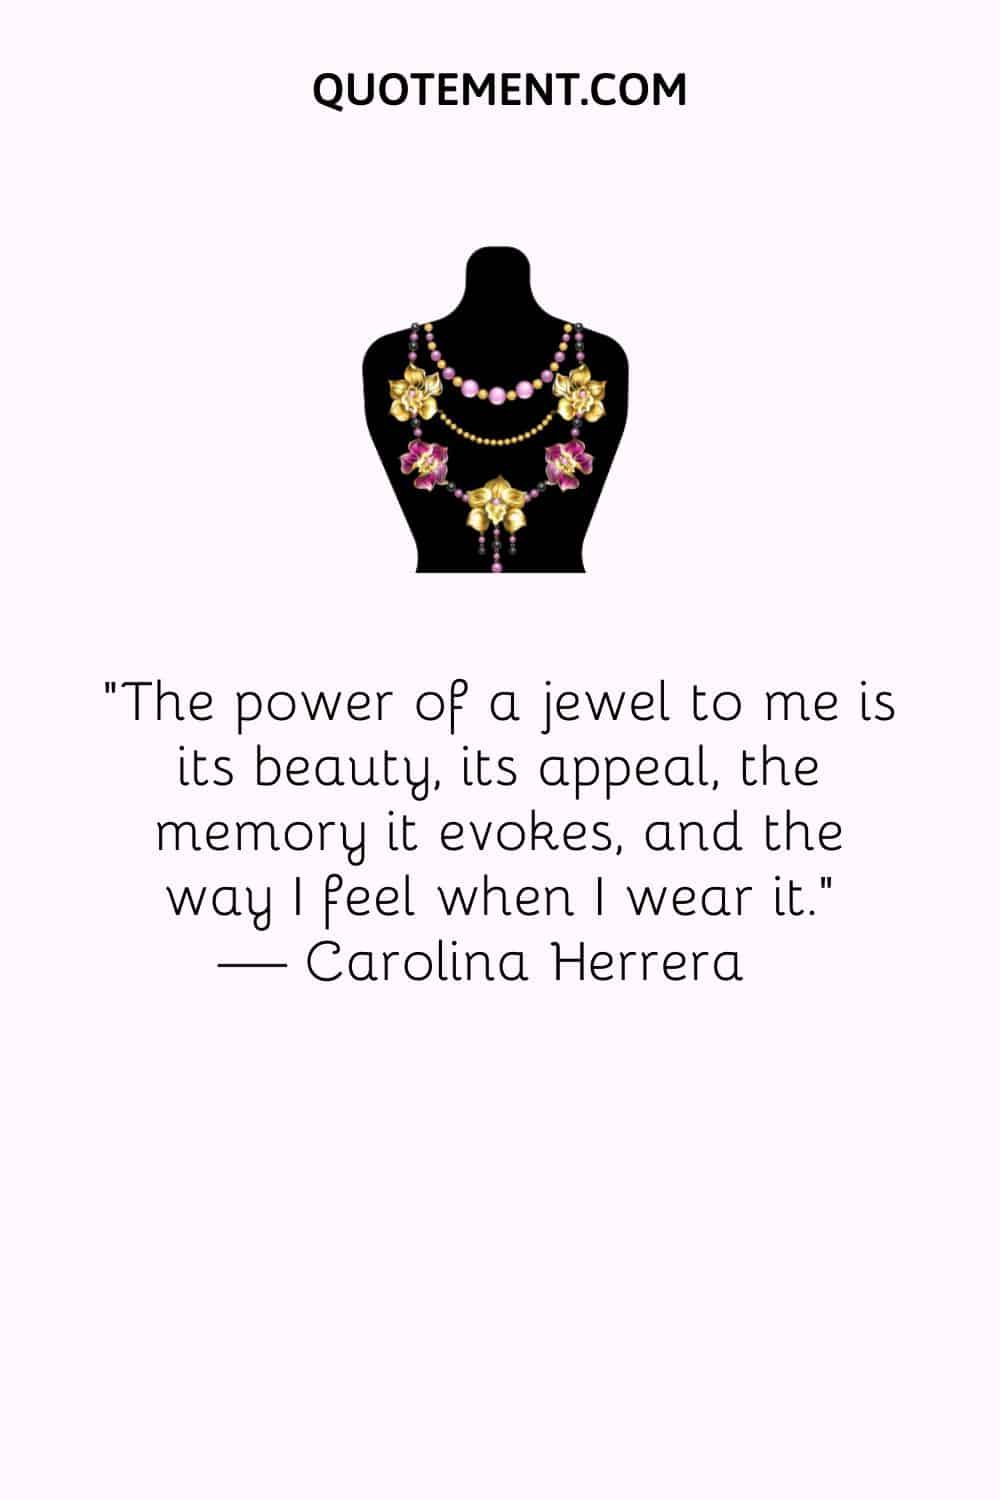 The power of a jewel to me is its beauty, its appeal, the memory it evokes, and the way I feel when I wear it